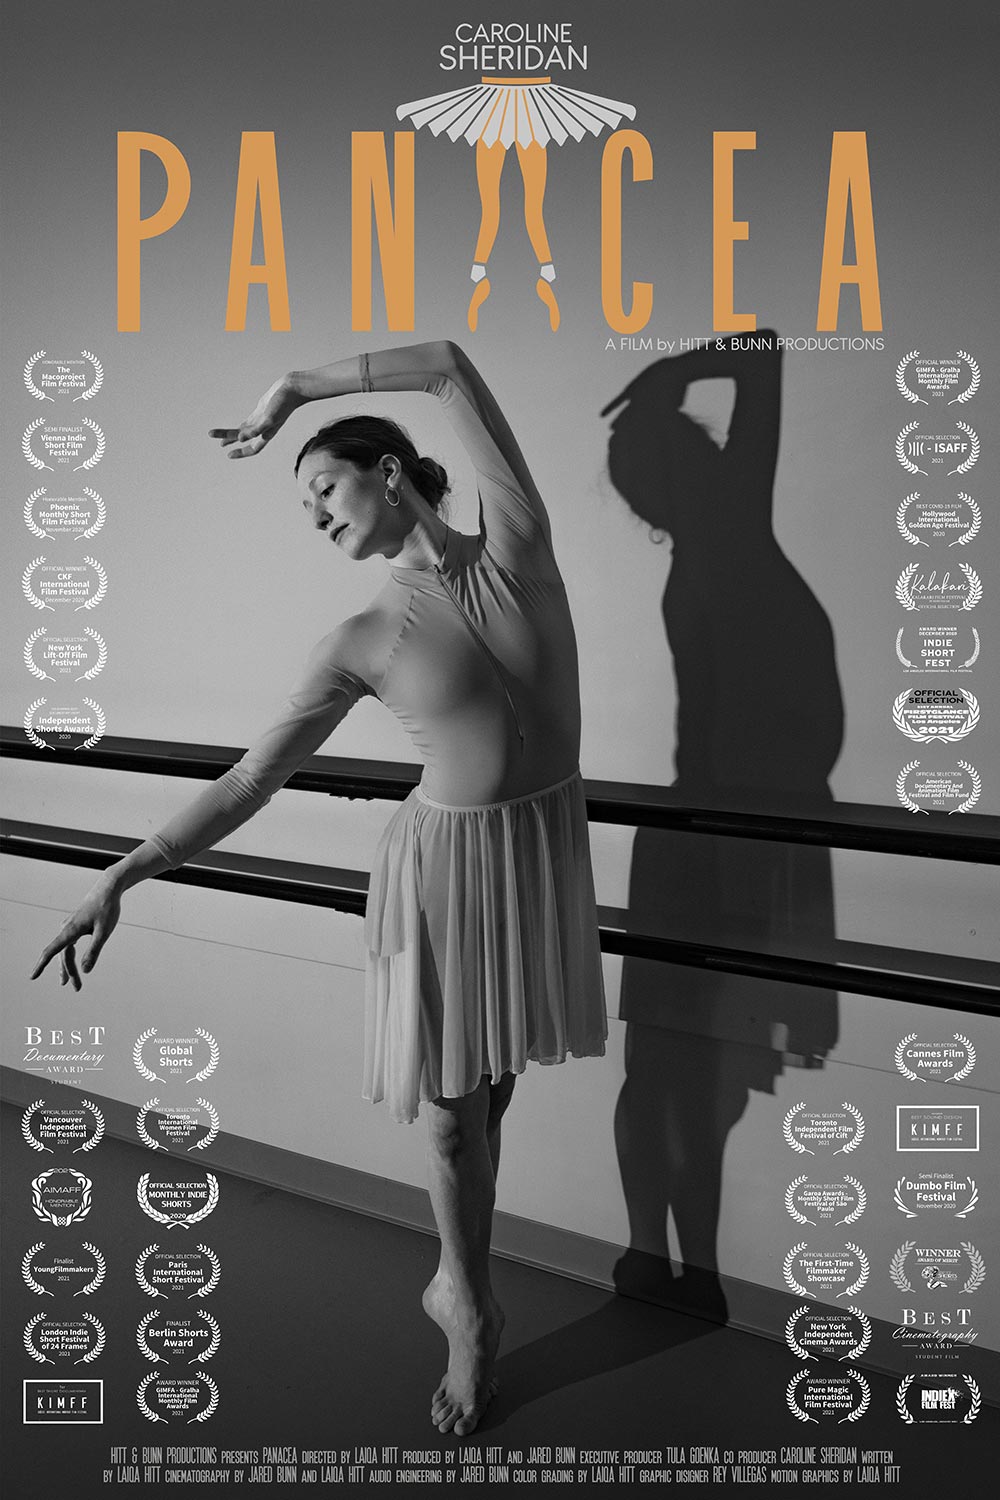 Panacea poster with a black and white shot of Caroline Sheridan dancing and multiple film festival laurel graphics